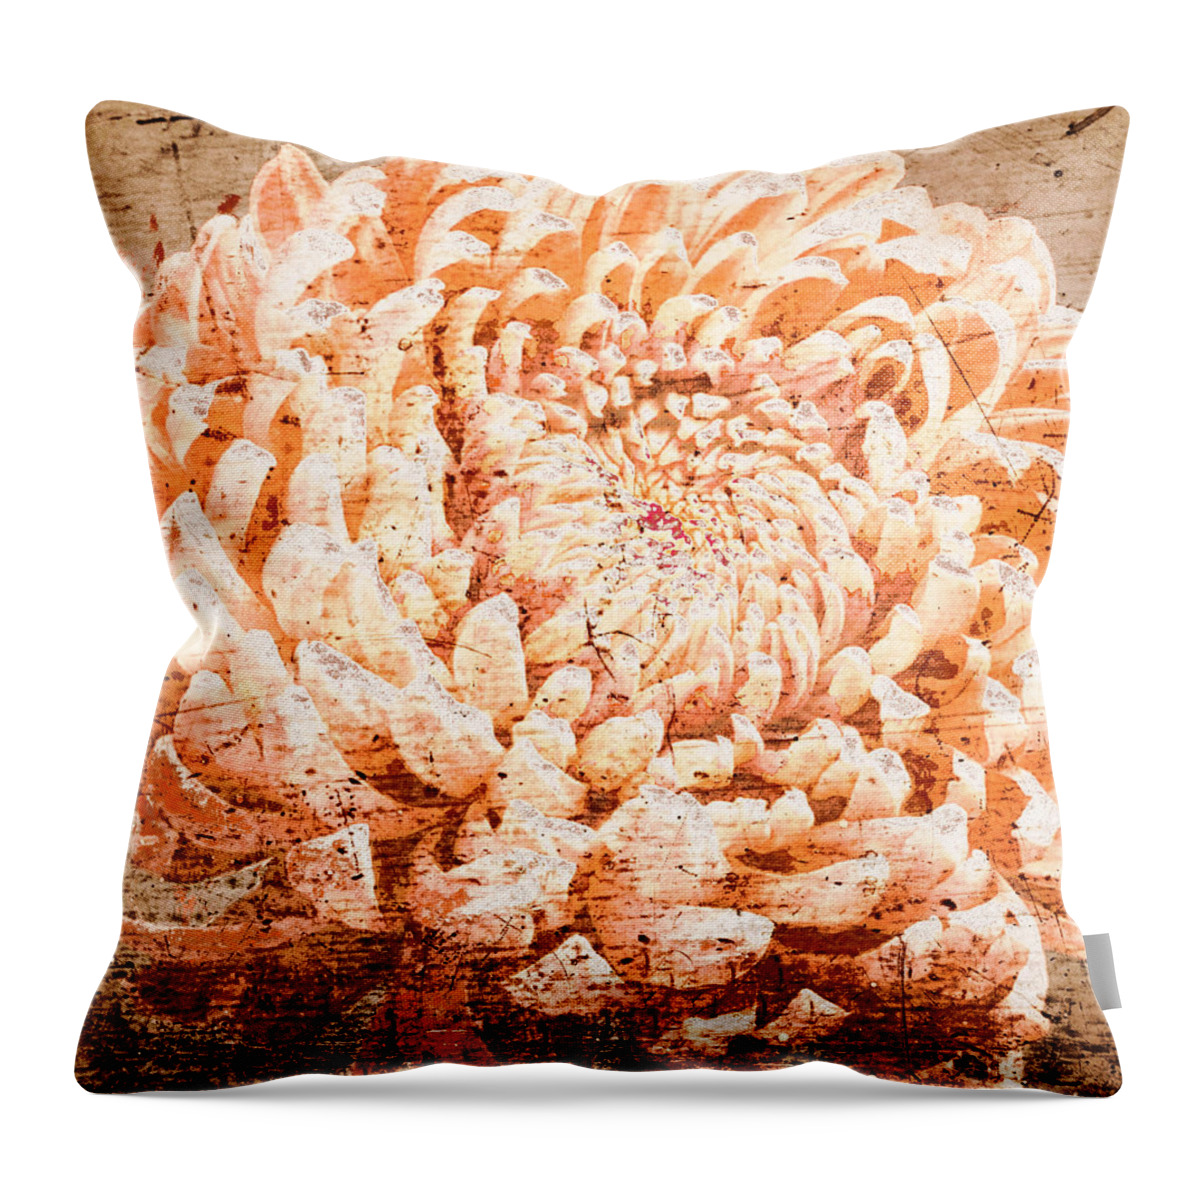 Mum Throw Pillow featuring the photograph Rustic Peach Mum by Suzanne Powers